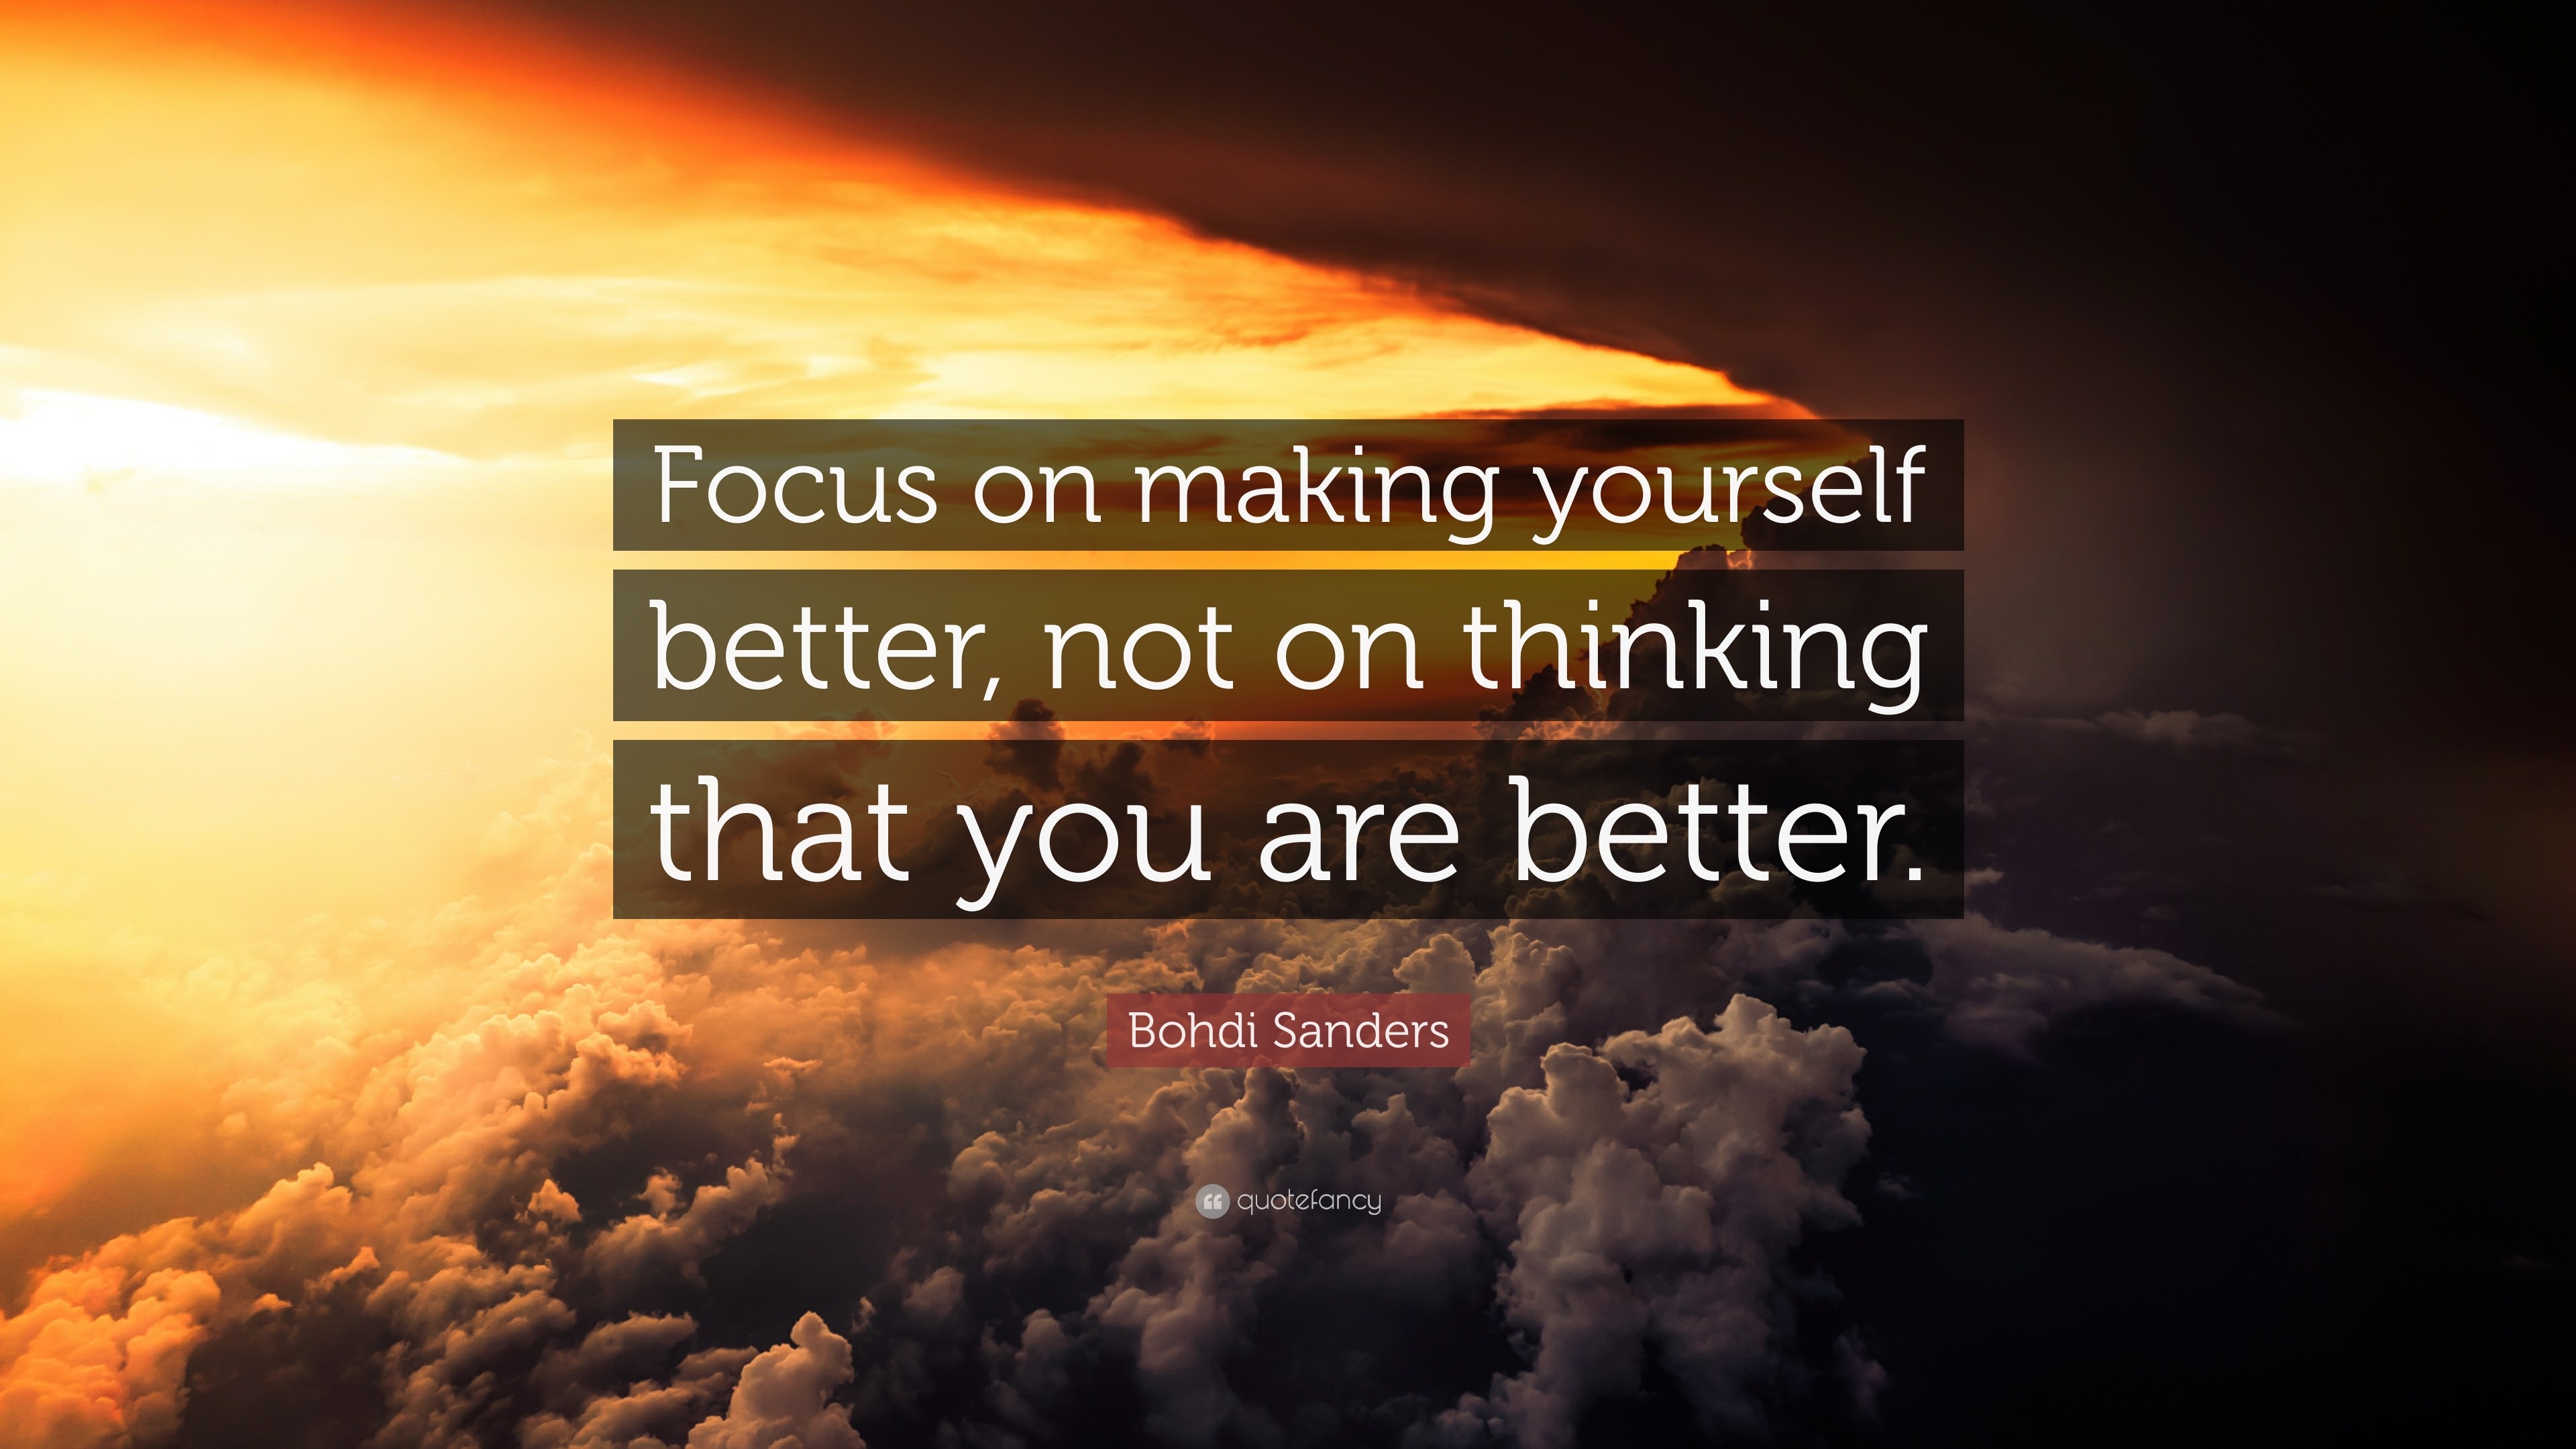 focus on yourself quotes